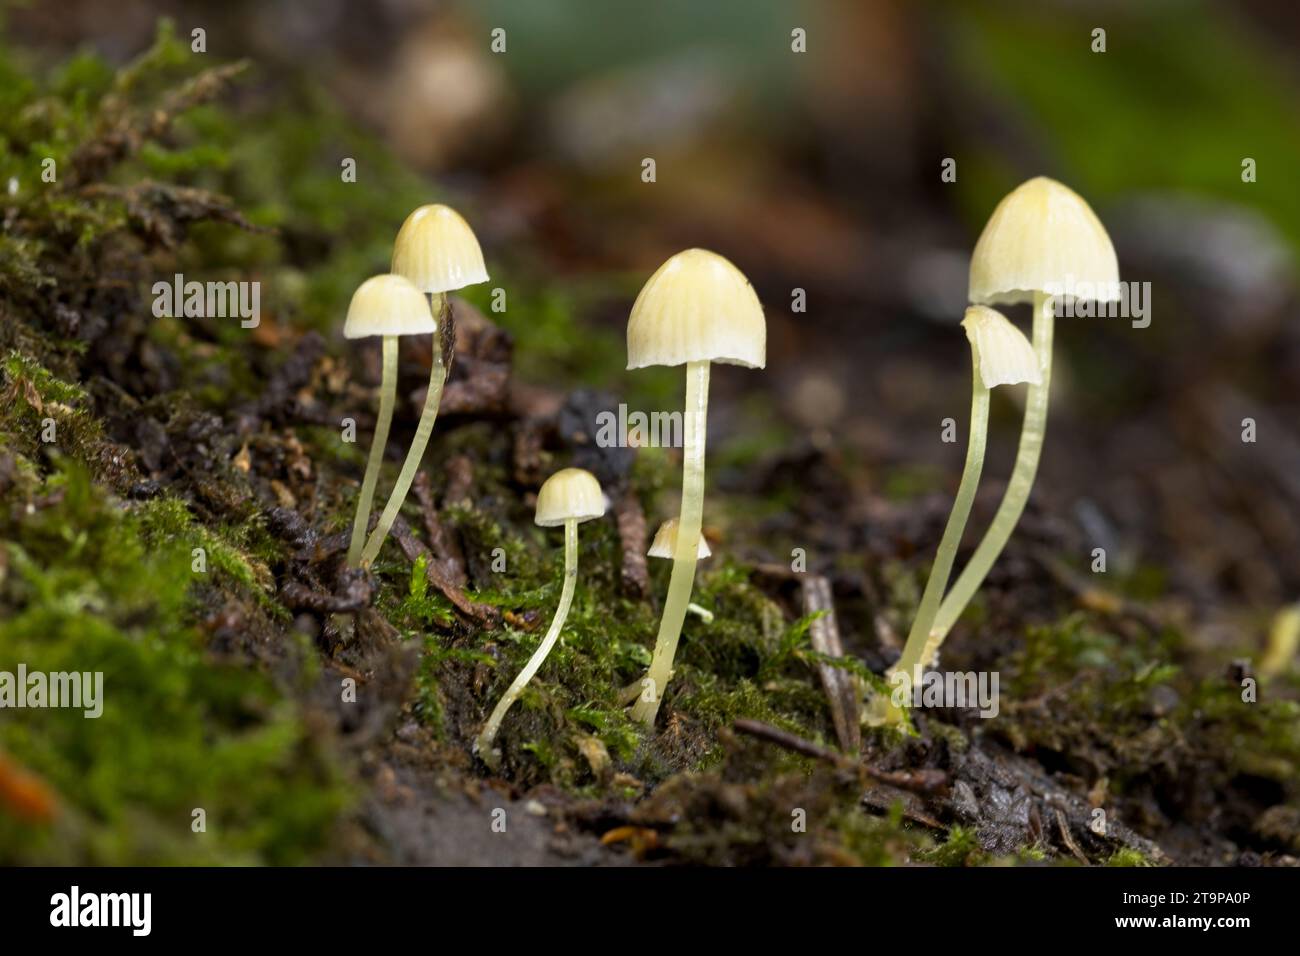 A close up photo of small capped mushrooms on fallen logs in a forest. Stock Photo